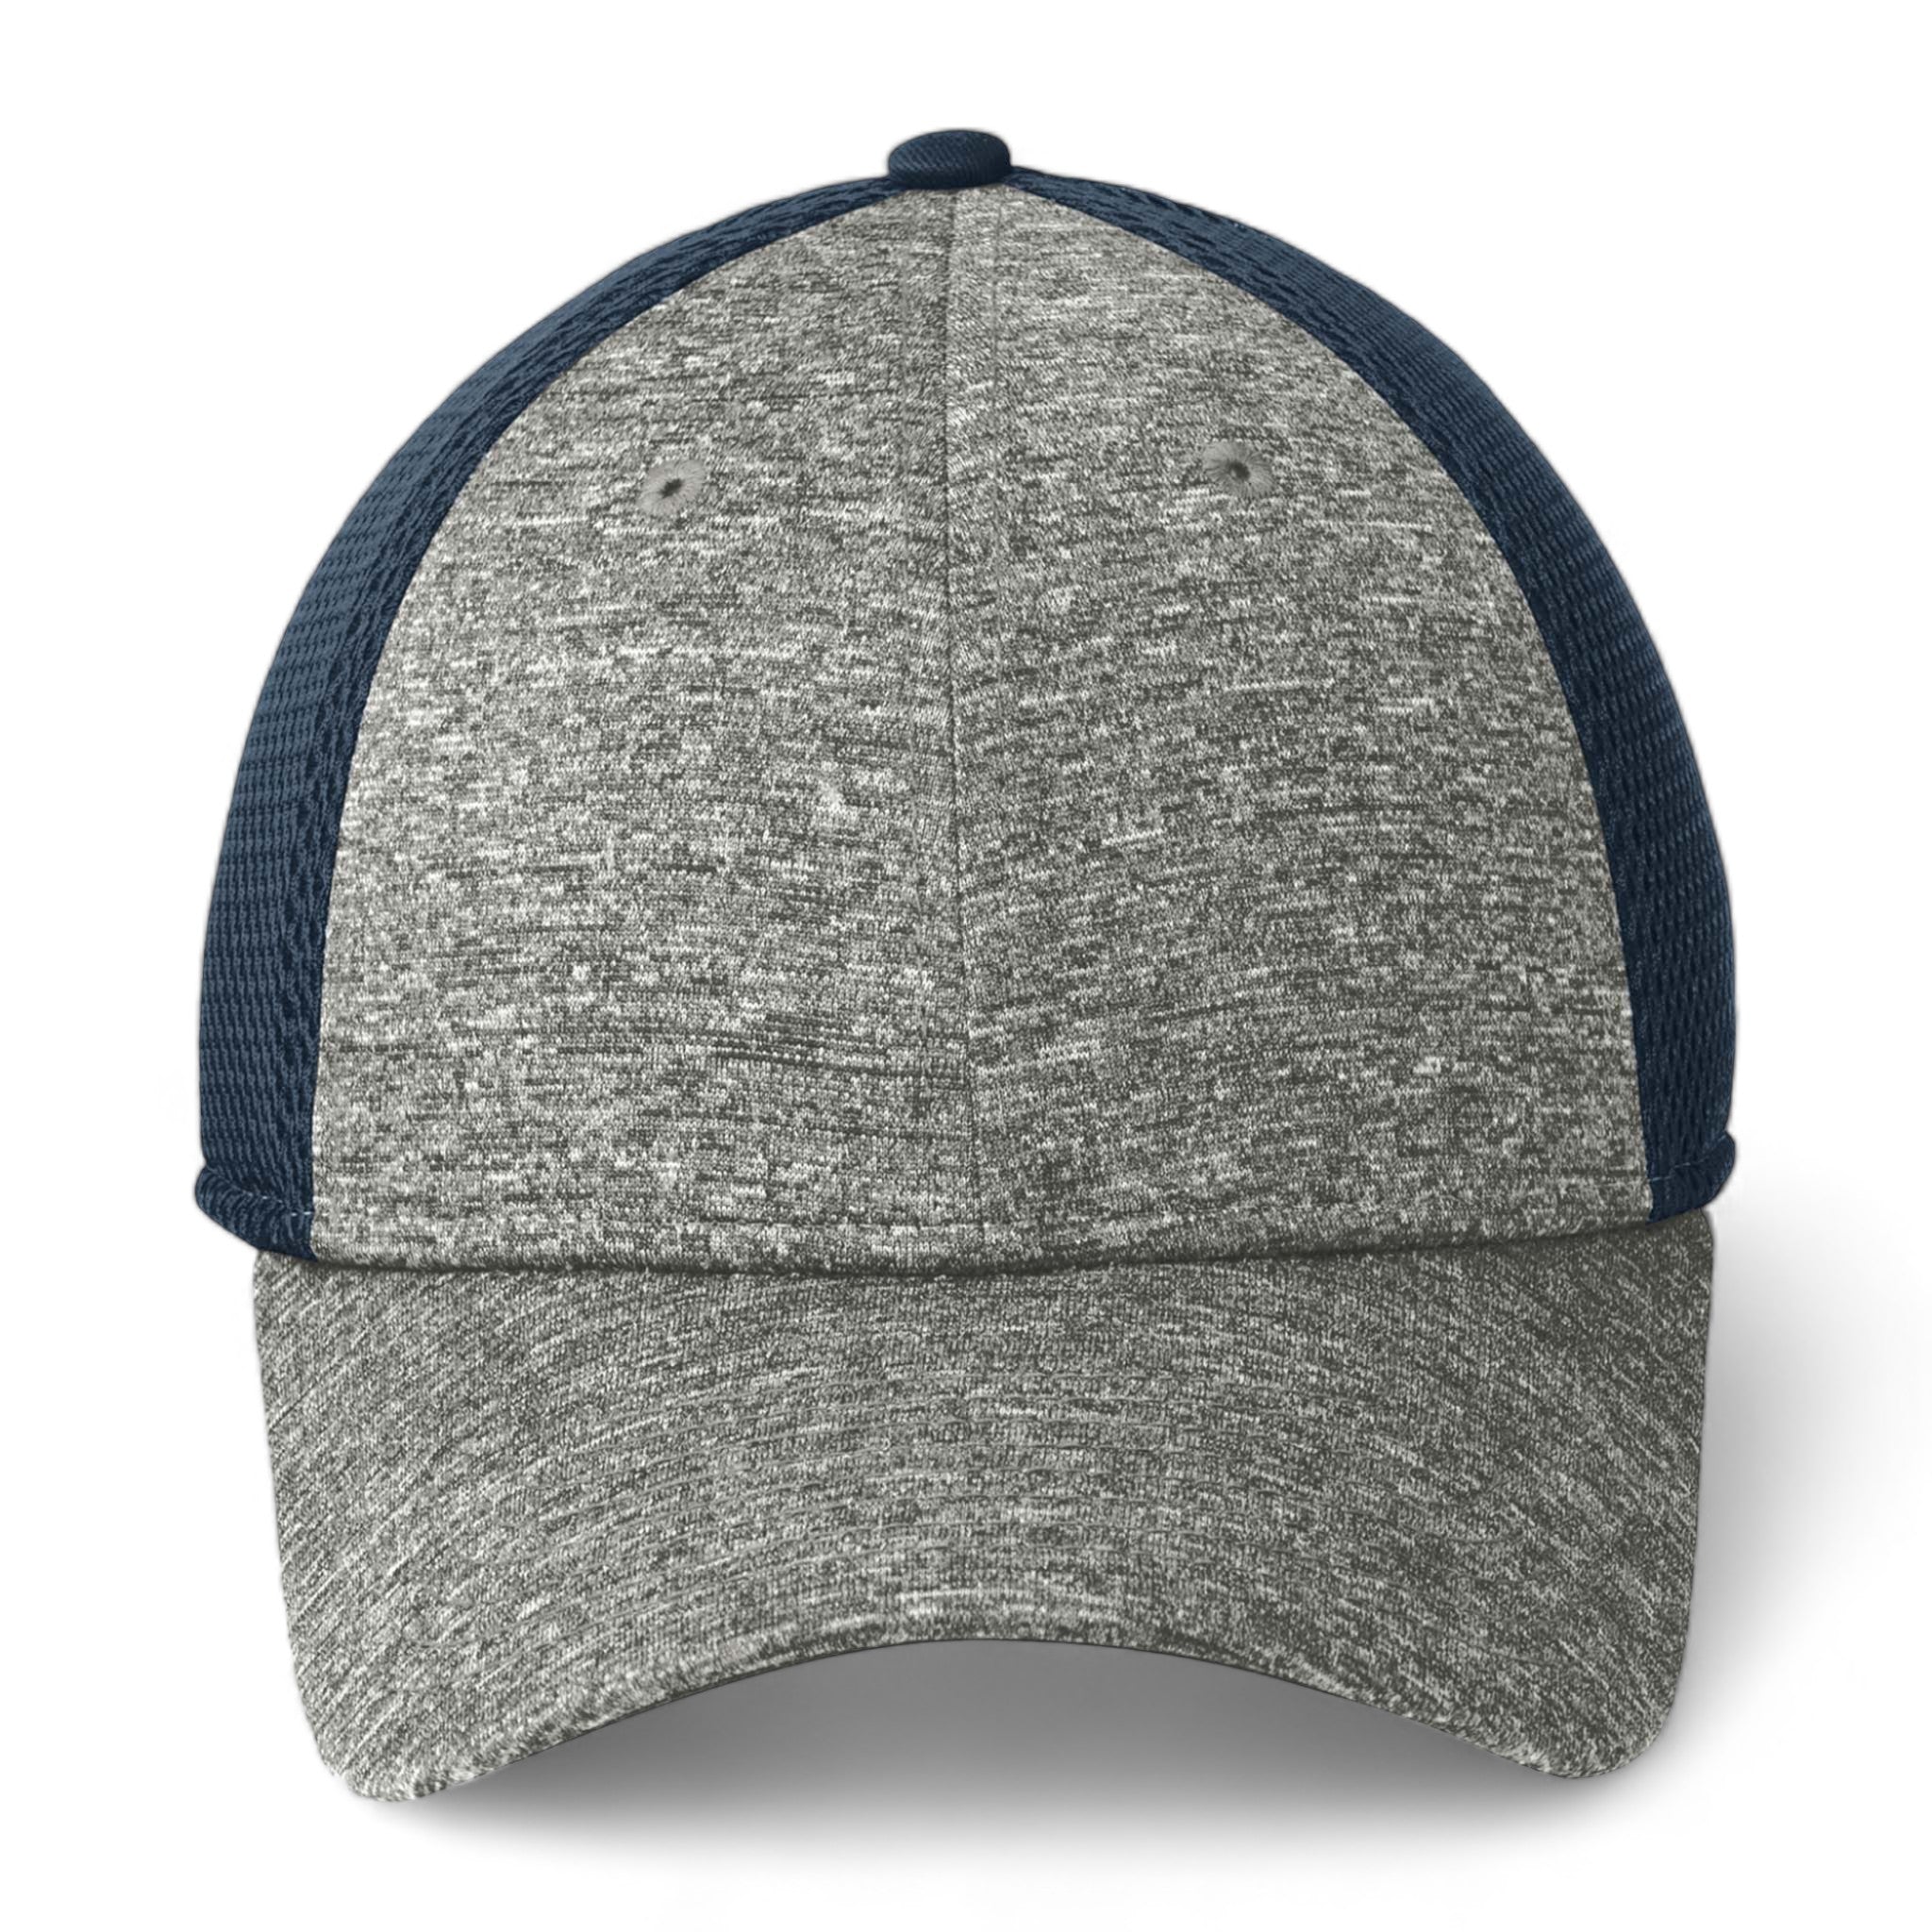 Front view of New Era NE702 custom hat in deep navy and shadow heather